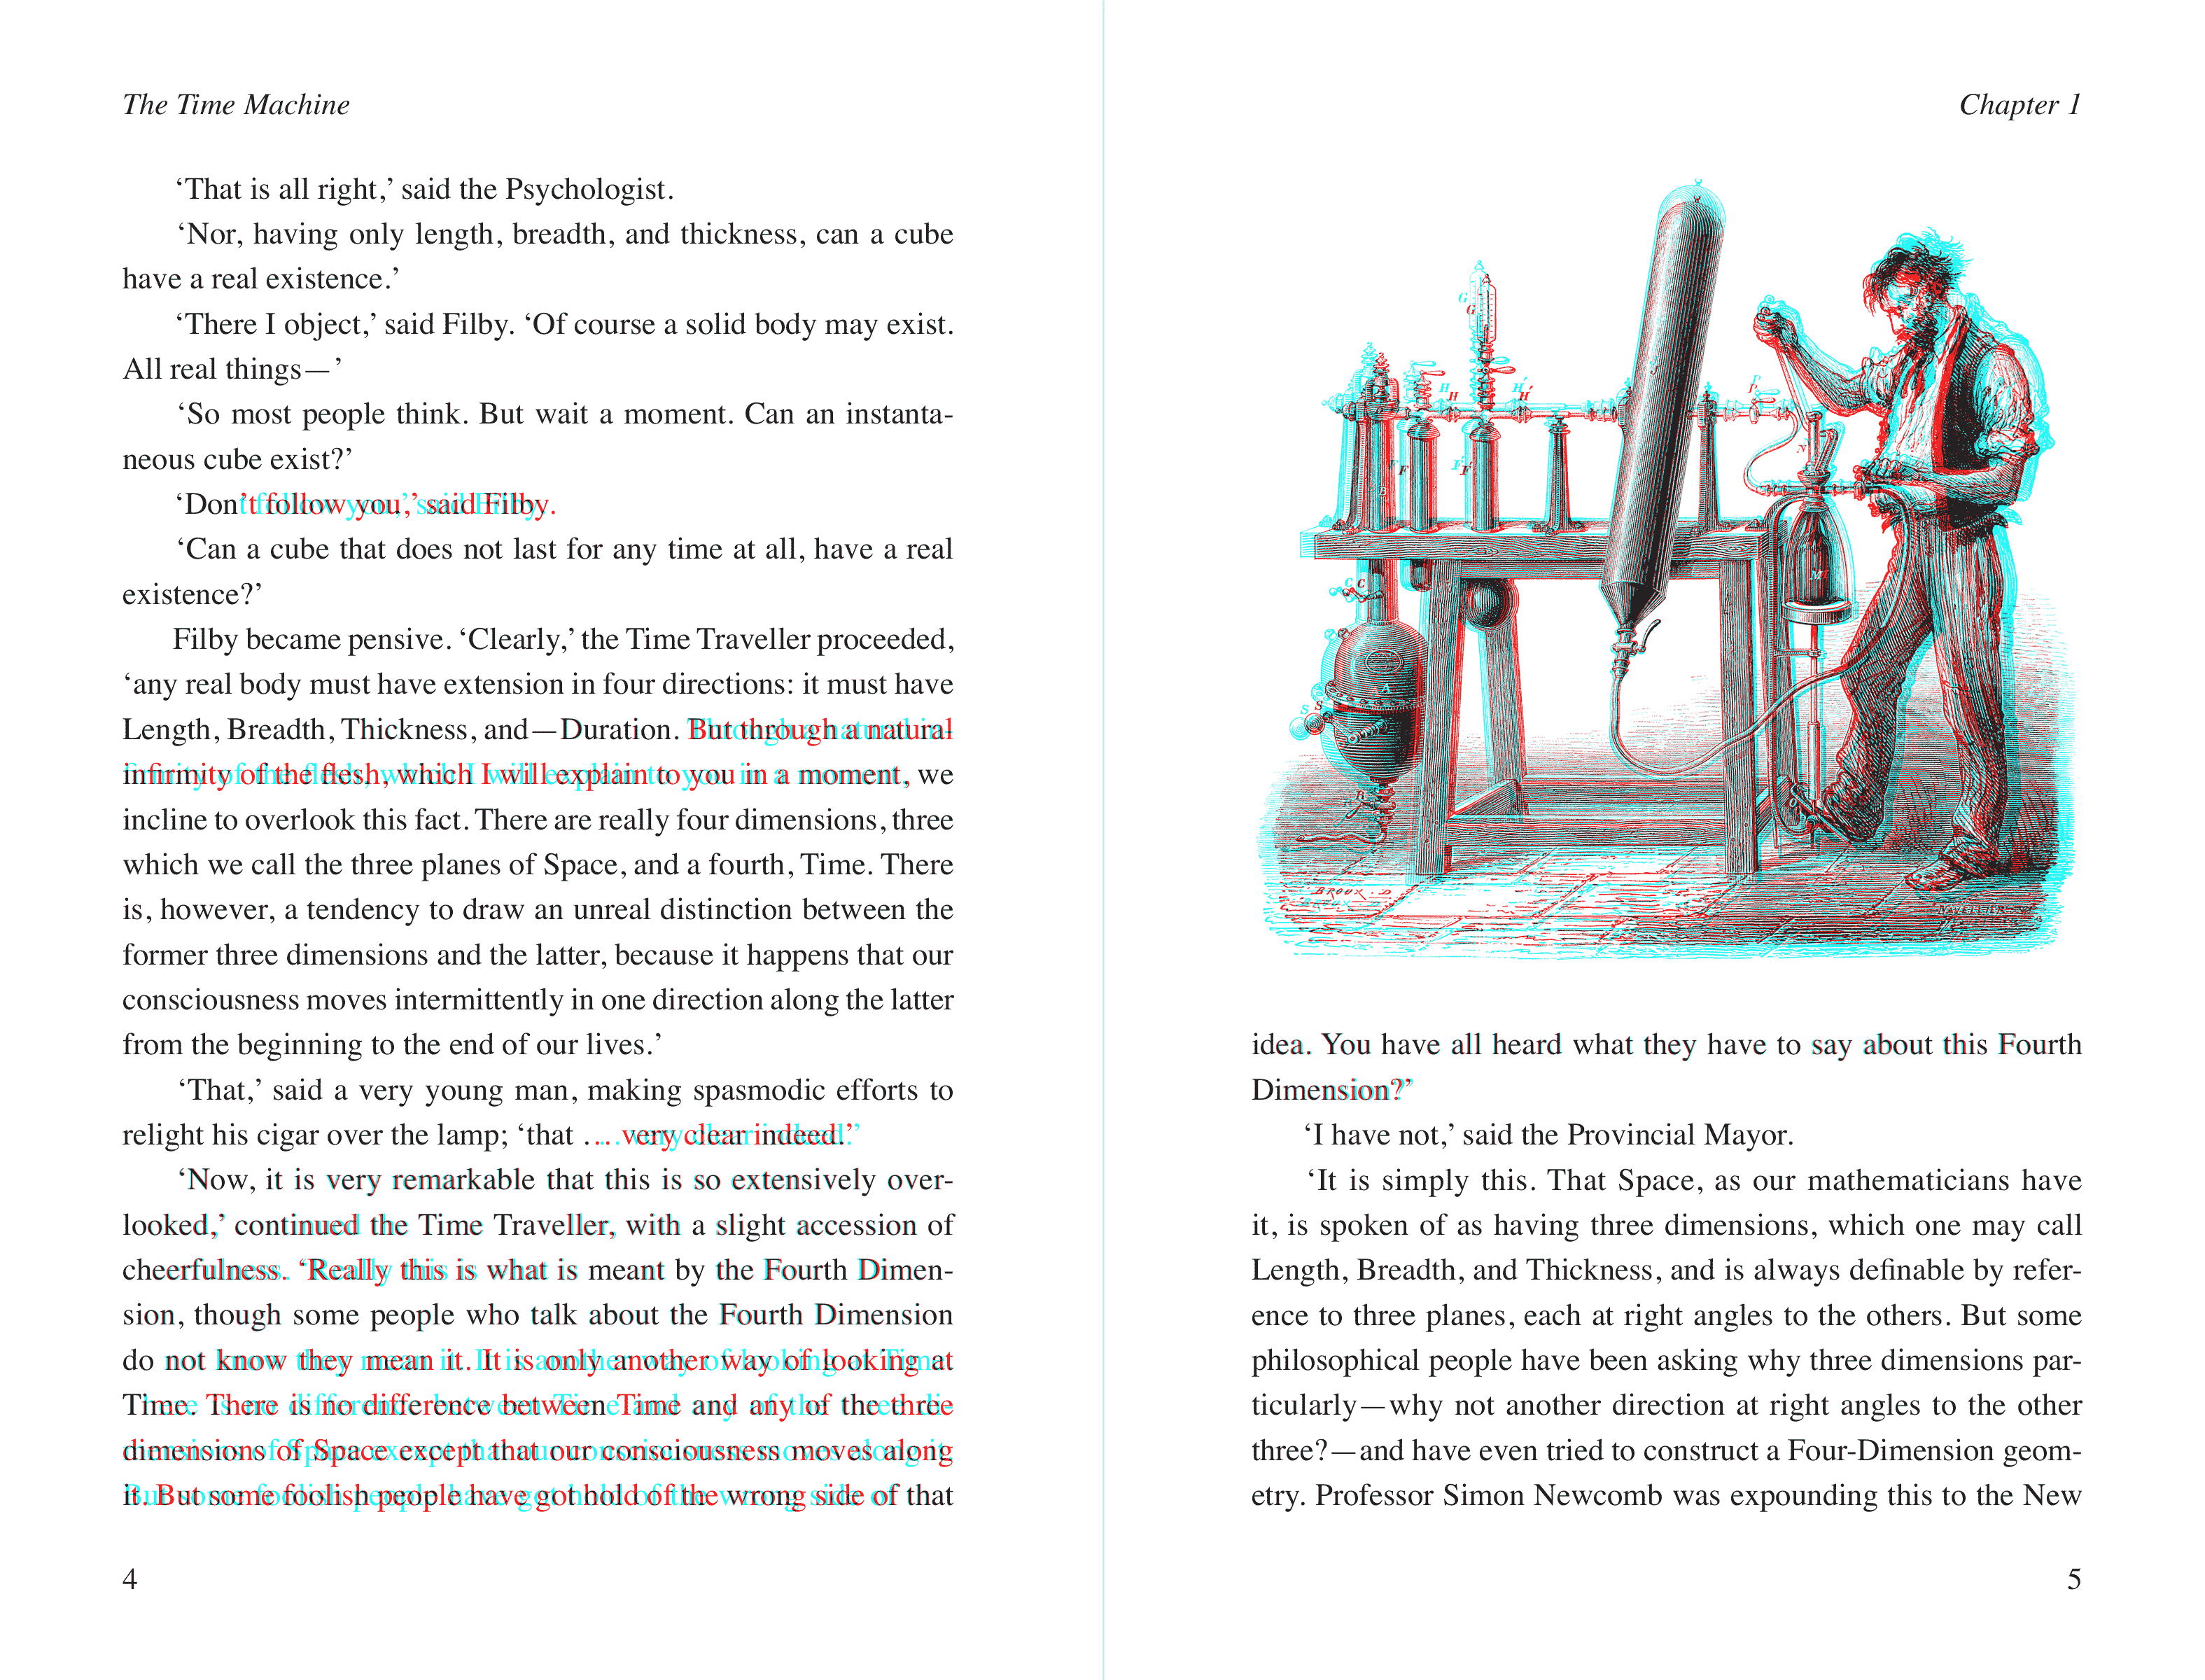 Comparison between two book pages